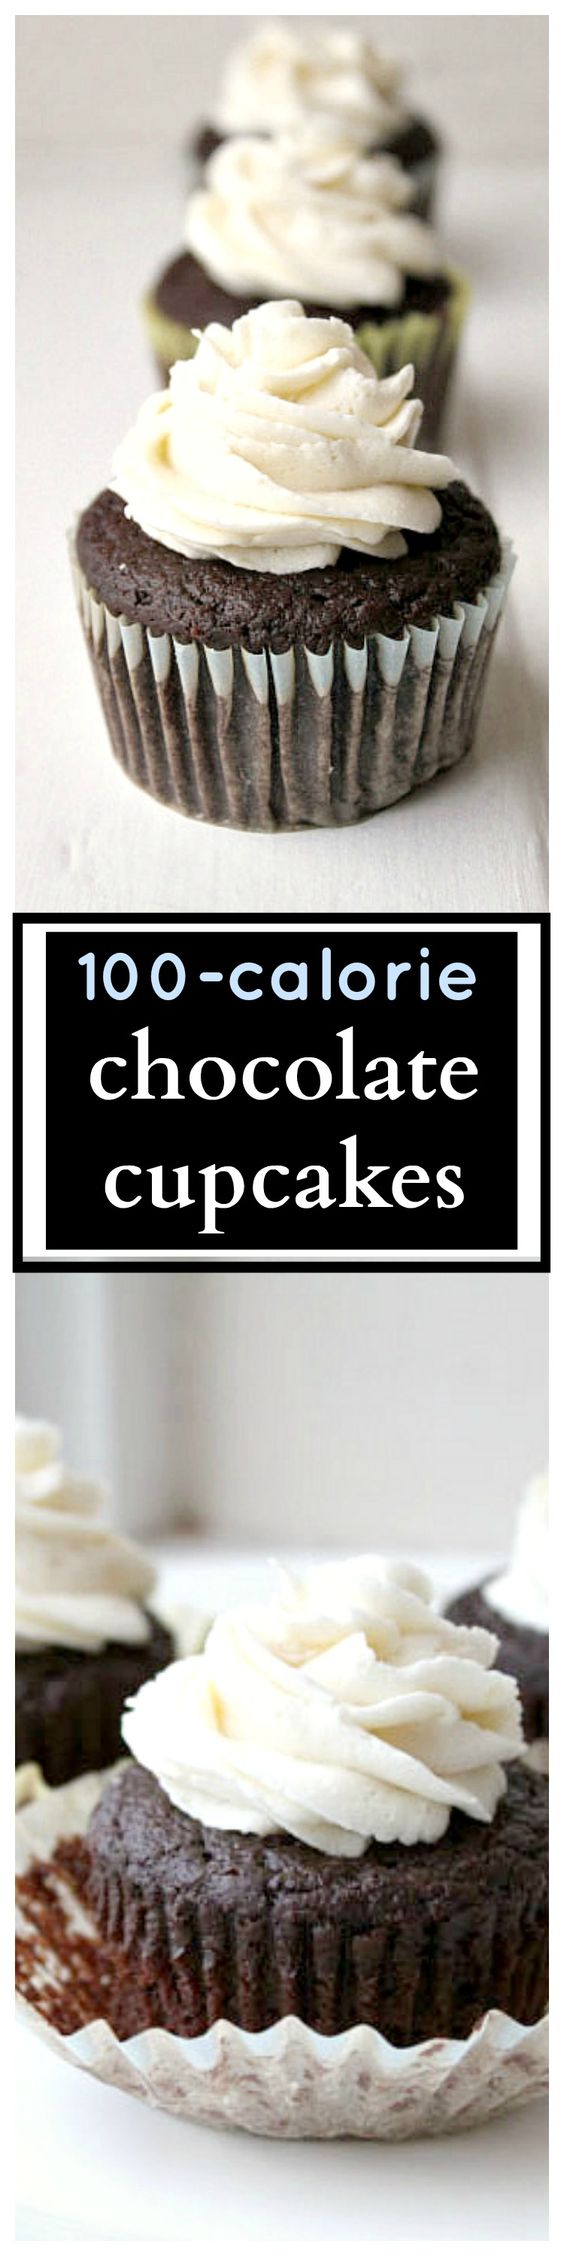 Healthy Low Calorie Chocolate Desserts